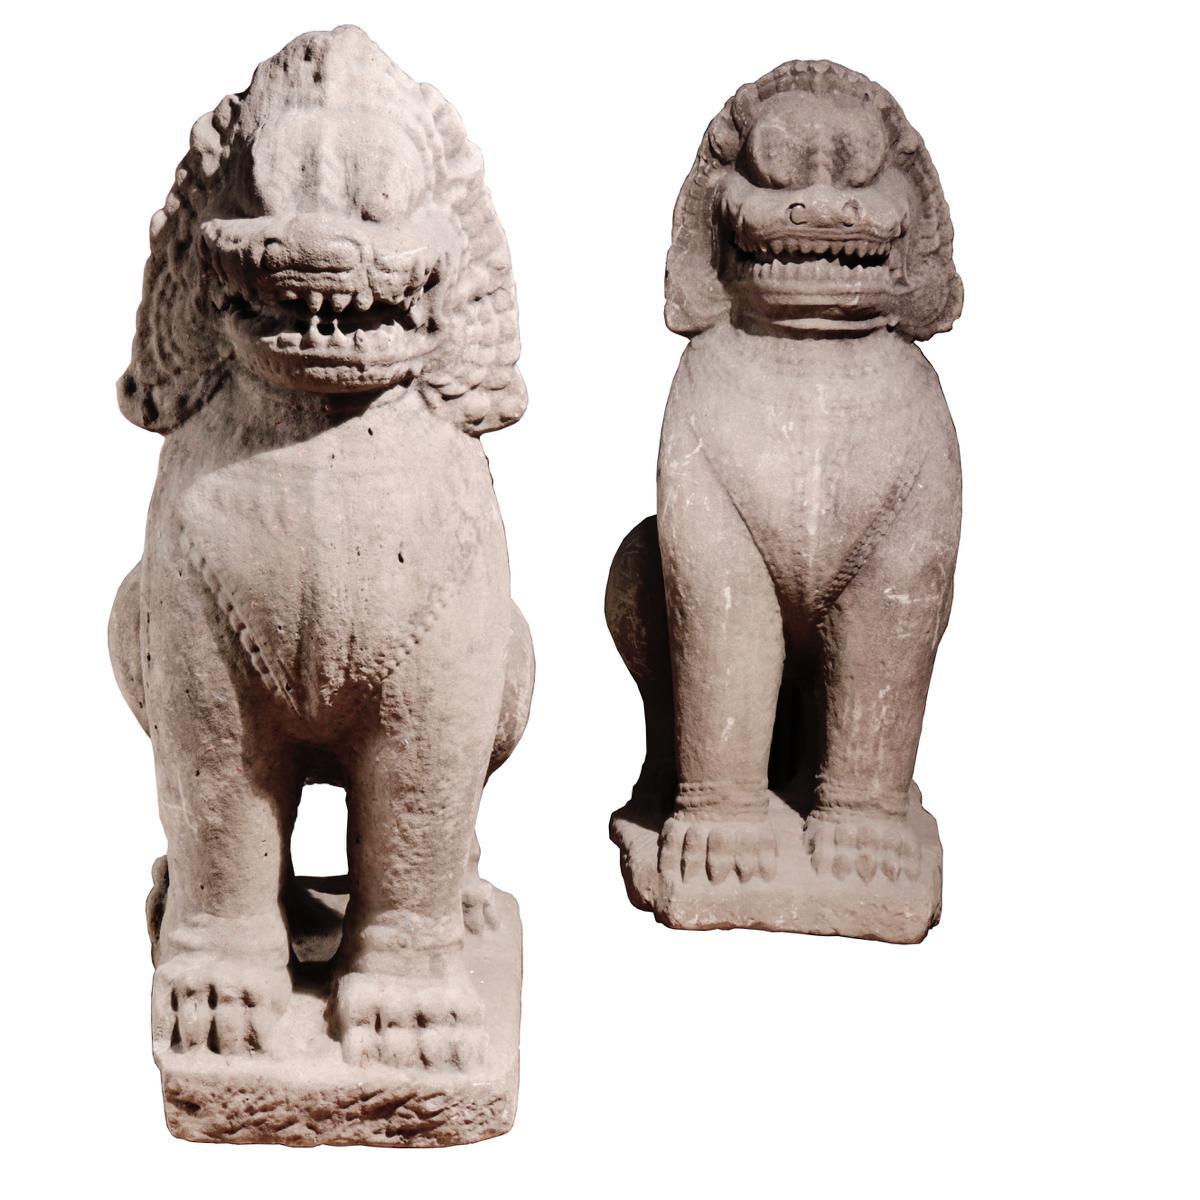 Khmer pair of Sandstone Guardian lion sculptures, Bayon style, Angkor period. Both fierce lions poised on a rectangular block with well-defined paws, half-sitting with a ridge line down centre of the back, ferocious expression with mouth open and